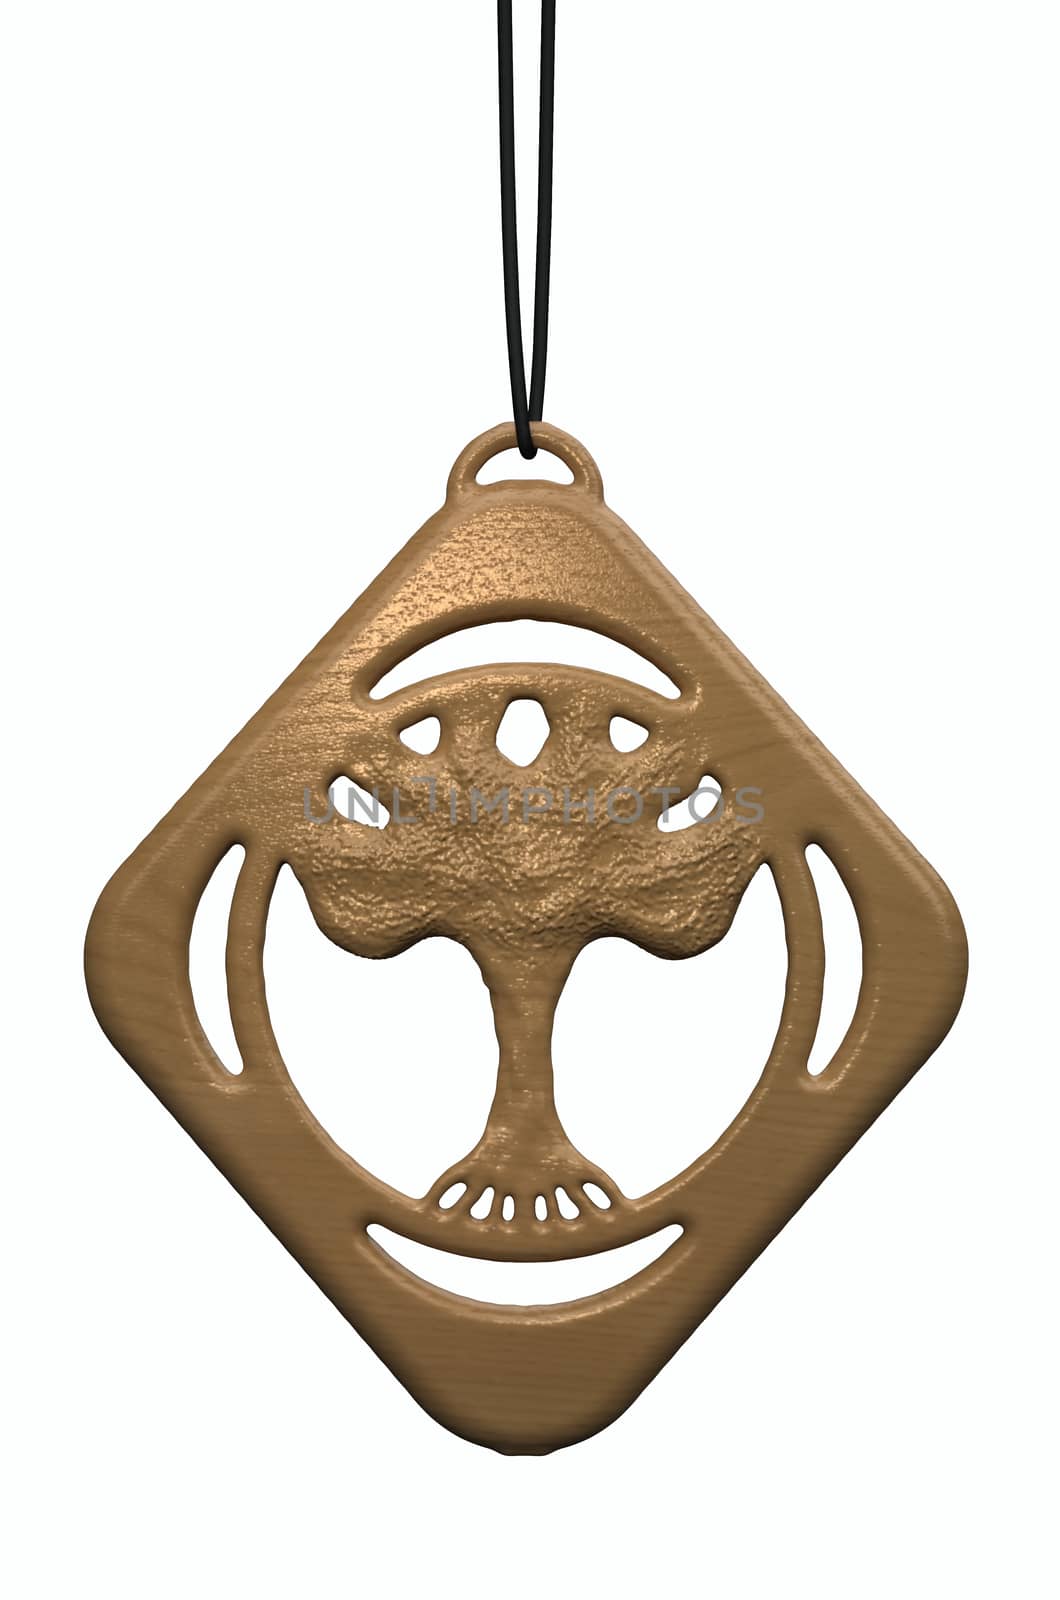 Wooden pendant with tree - symbol of life